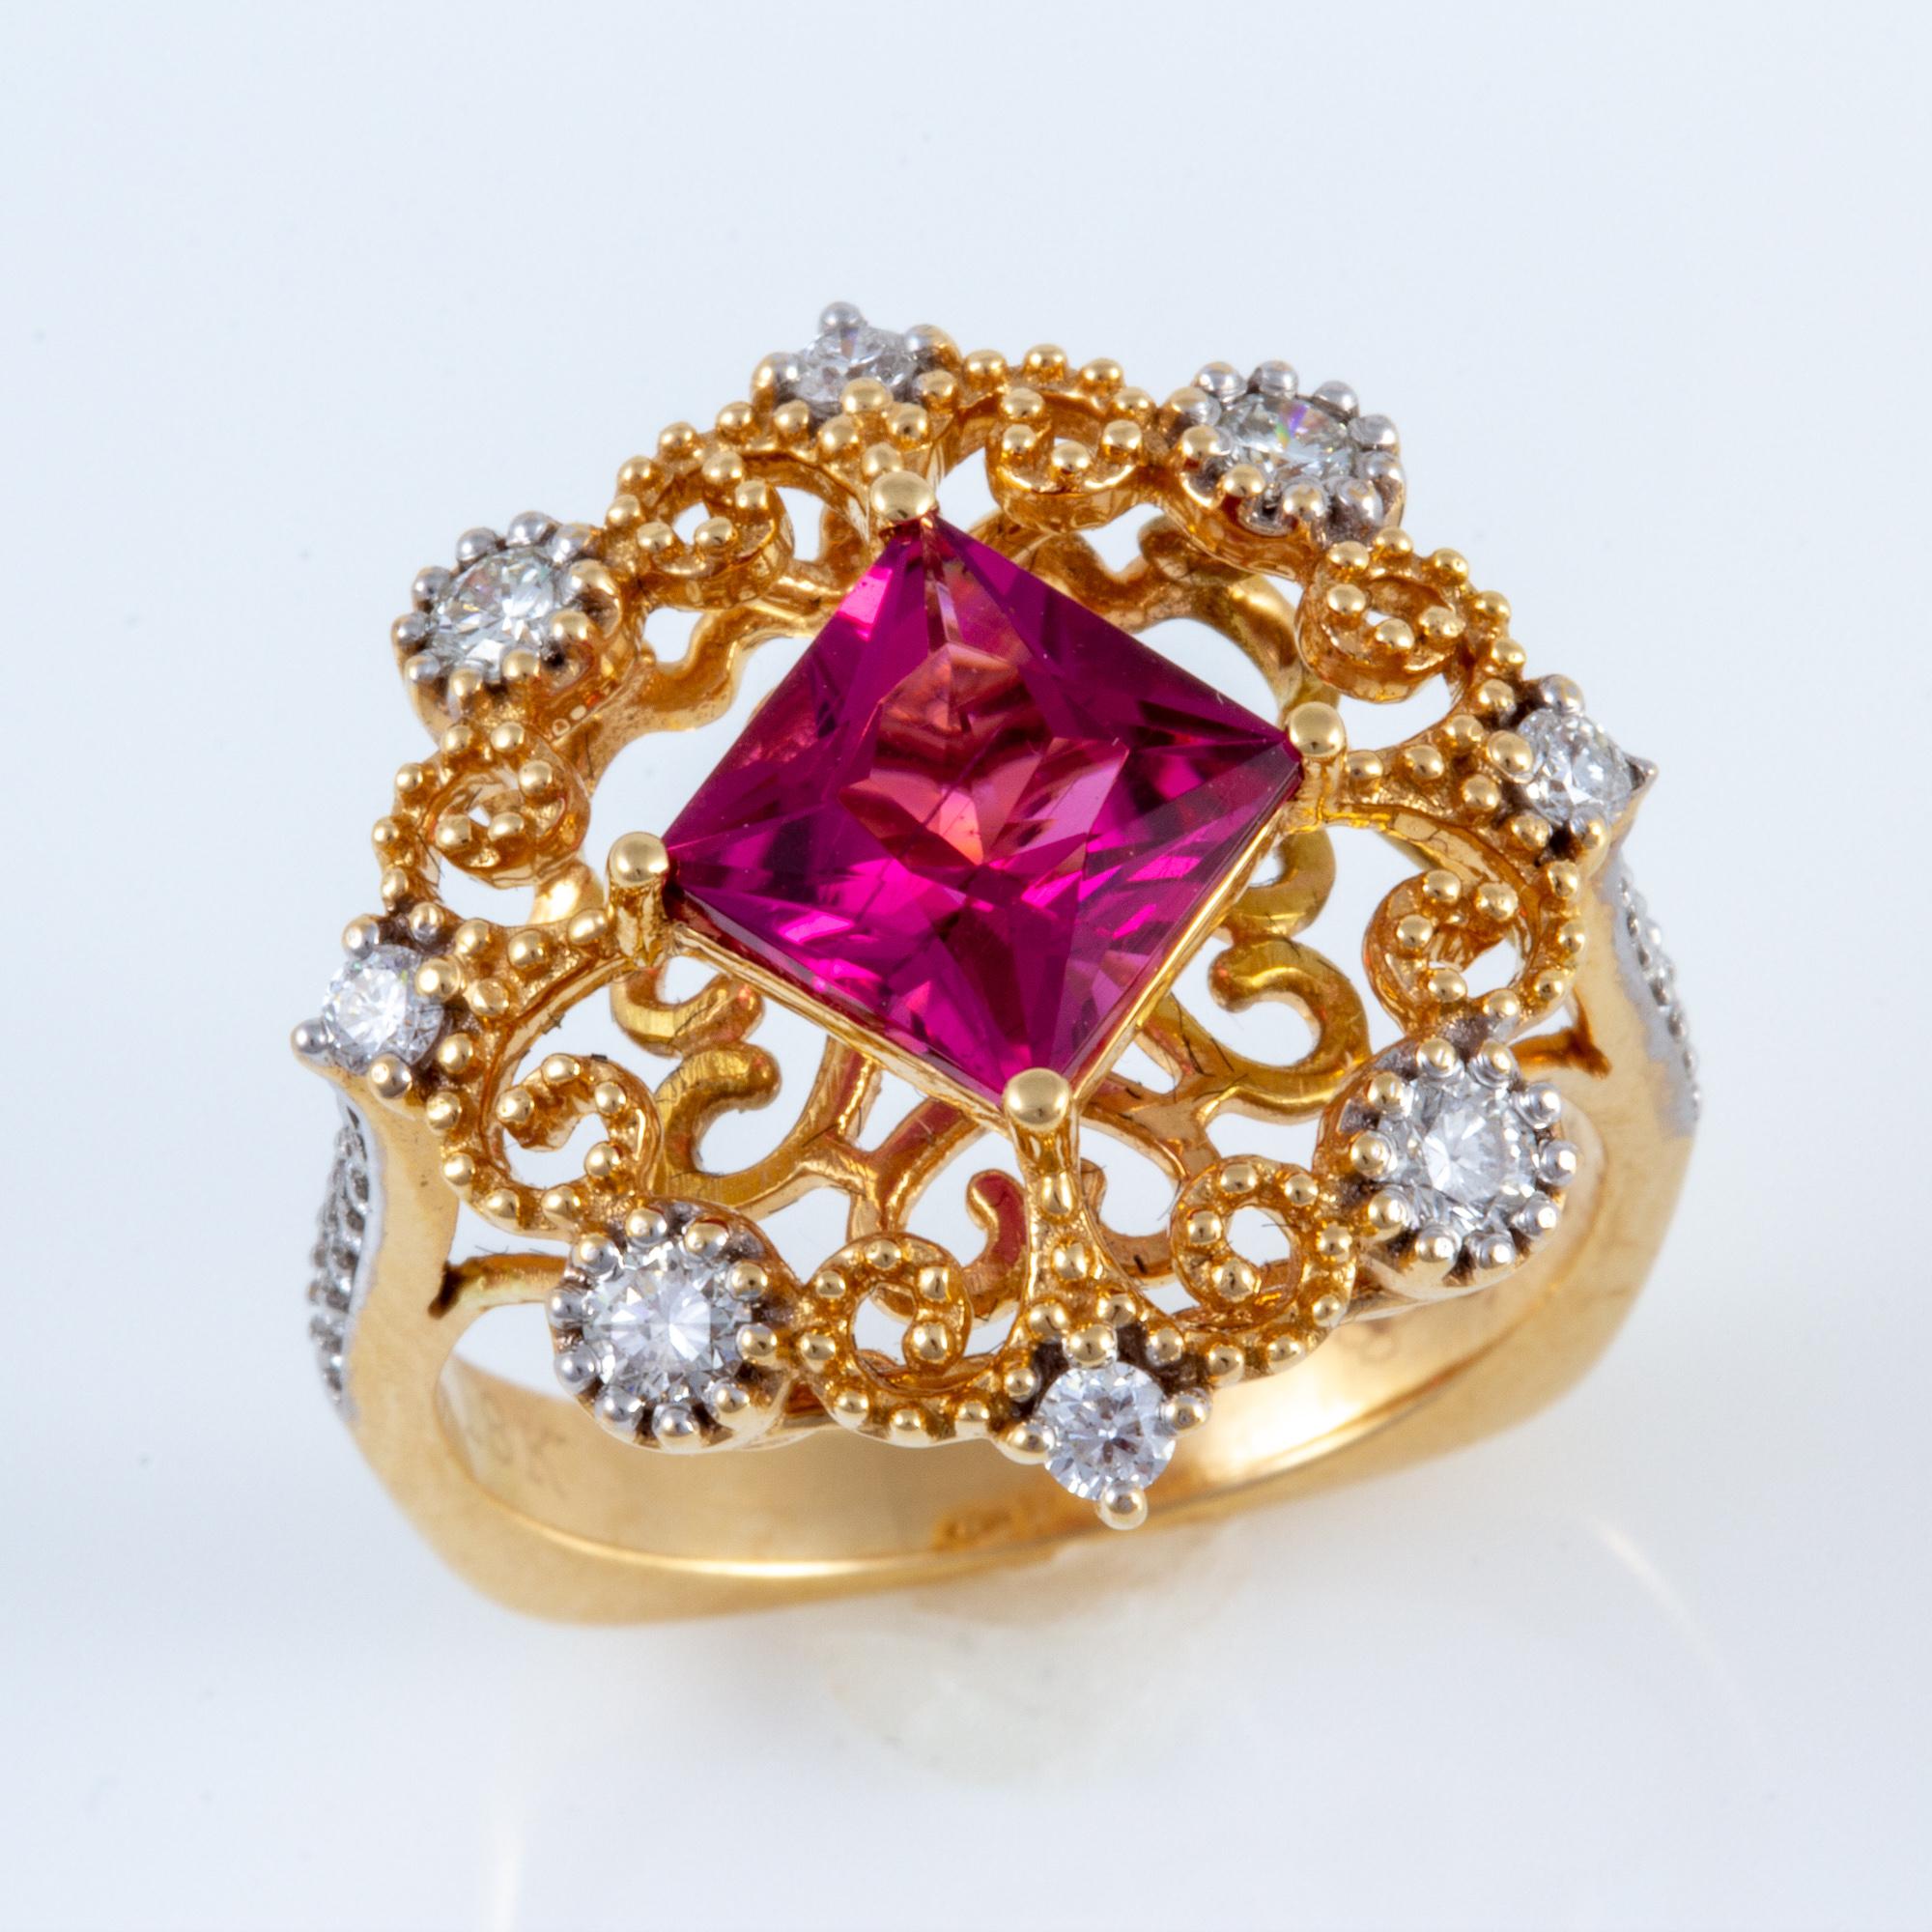 Rubellite Tourmaline and Diamond Ring set in 18 kt Gold For Sale 1